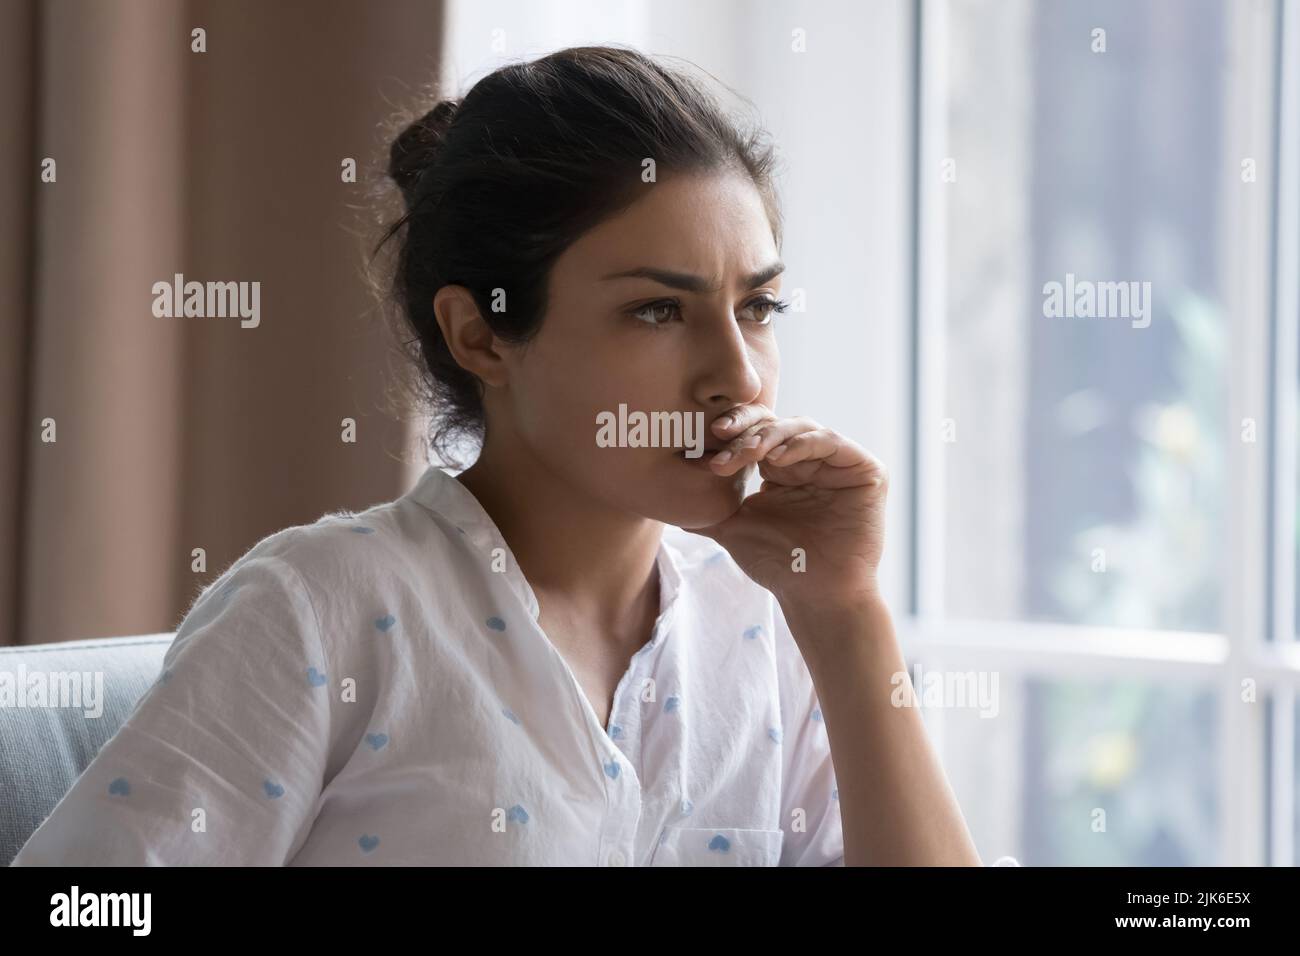 Serious thoughtful beautiful Indian woman sitting on couch indoors Stock Photo